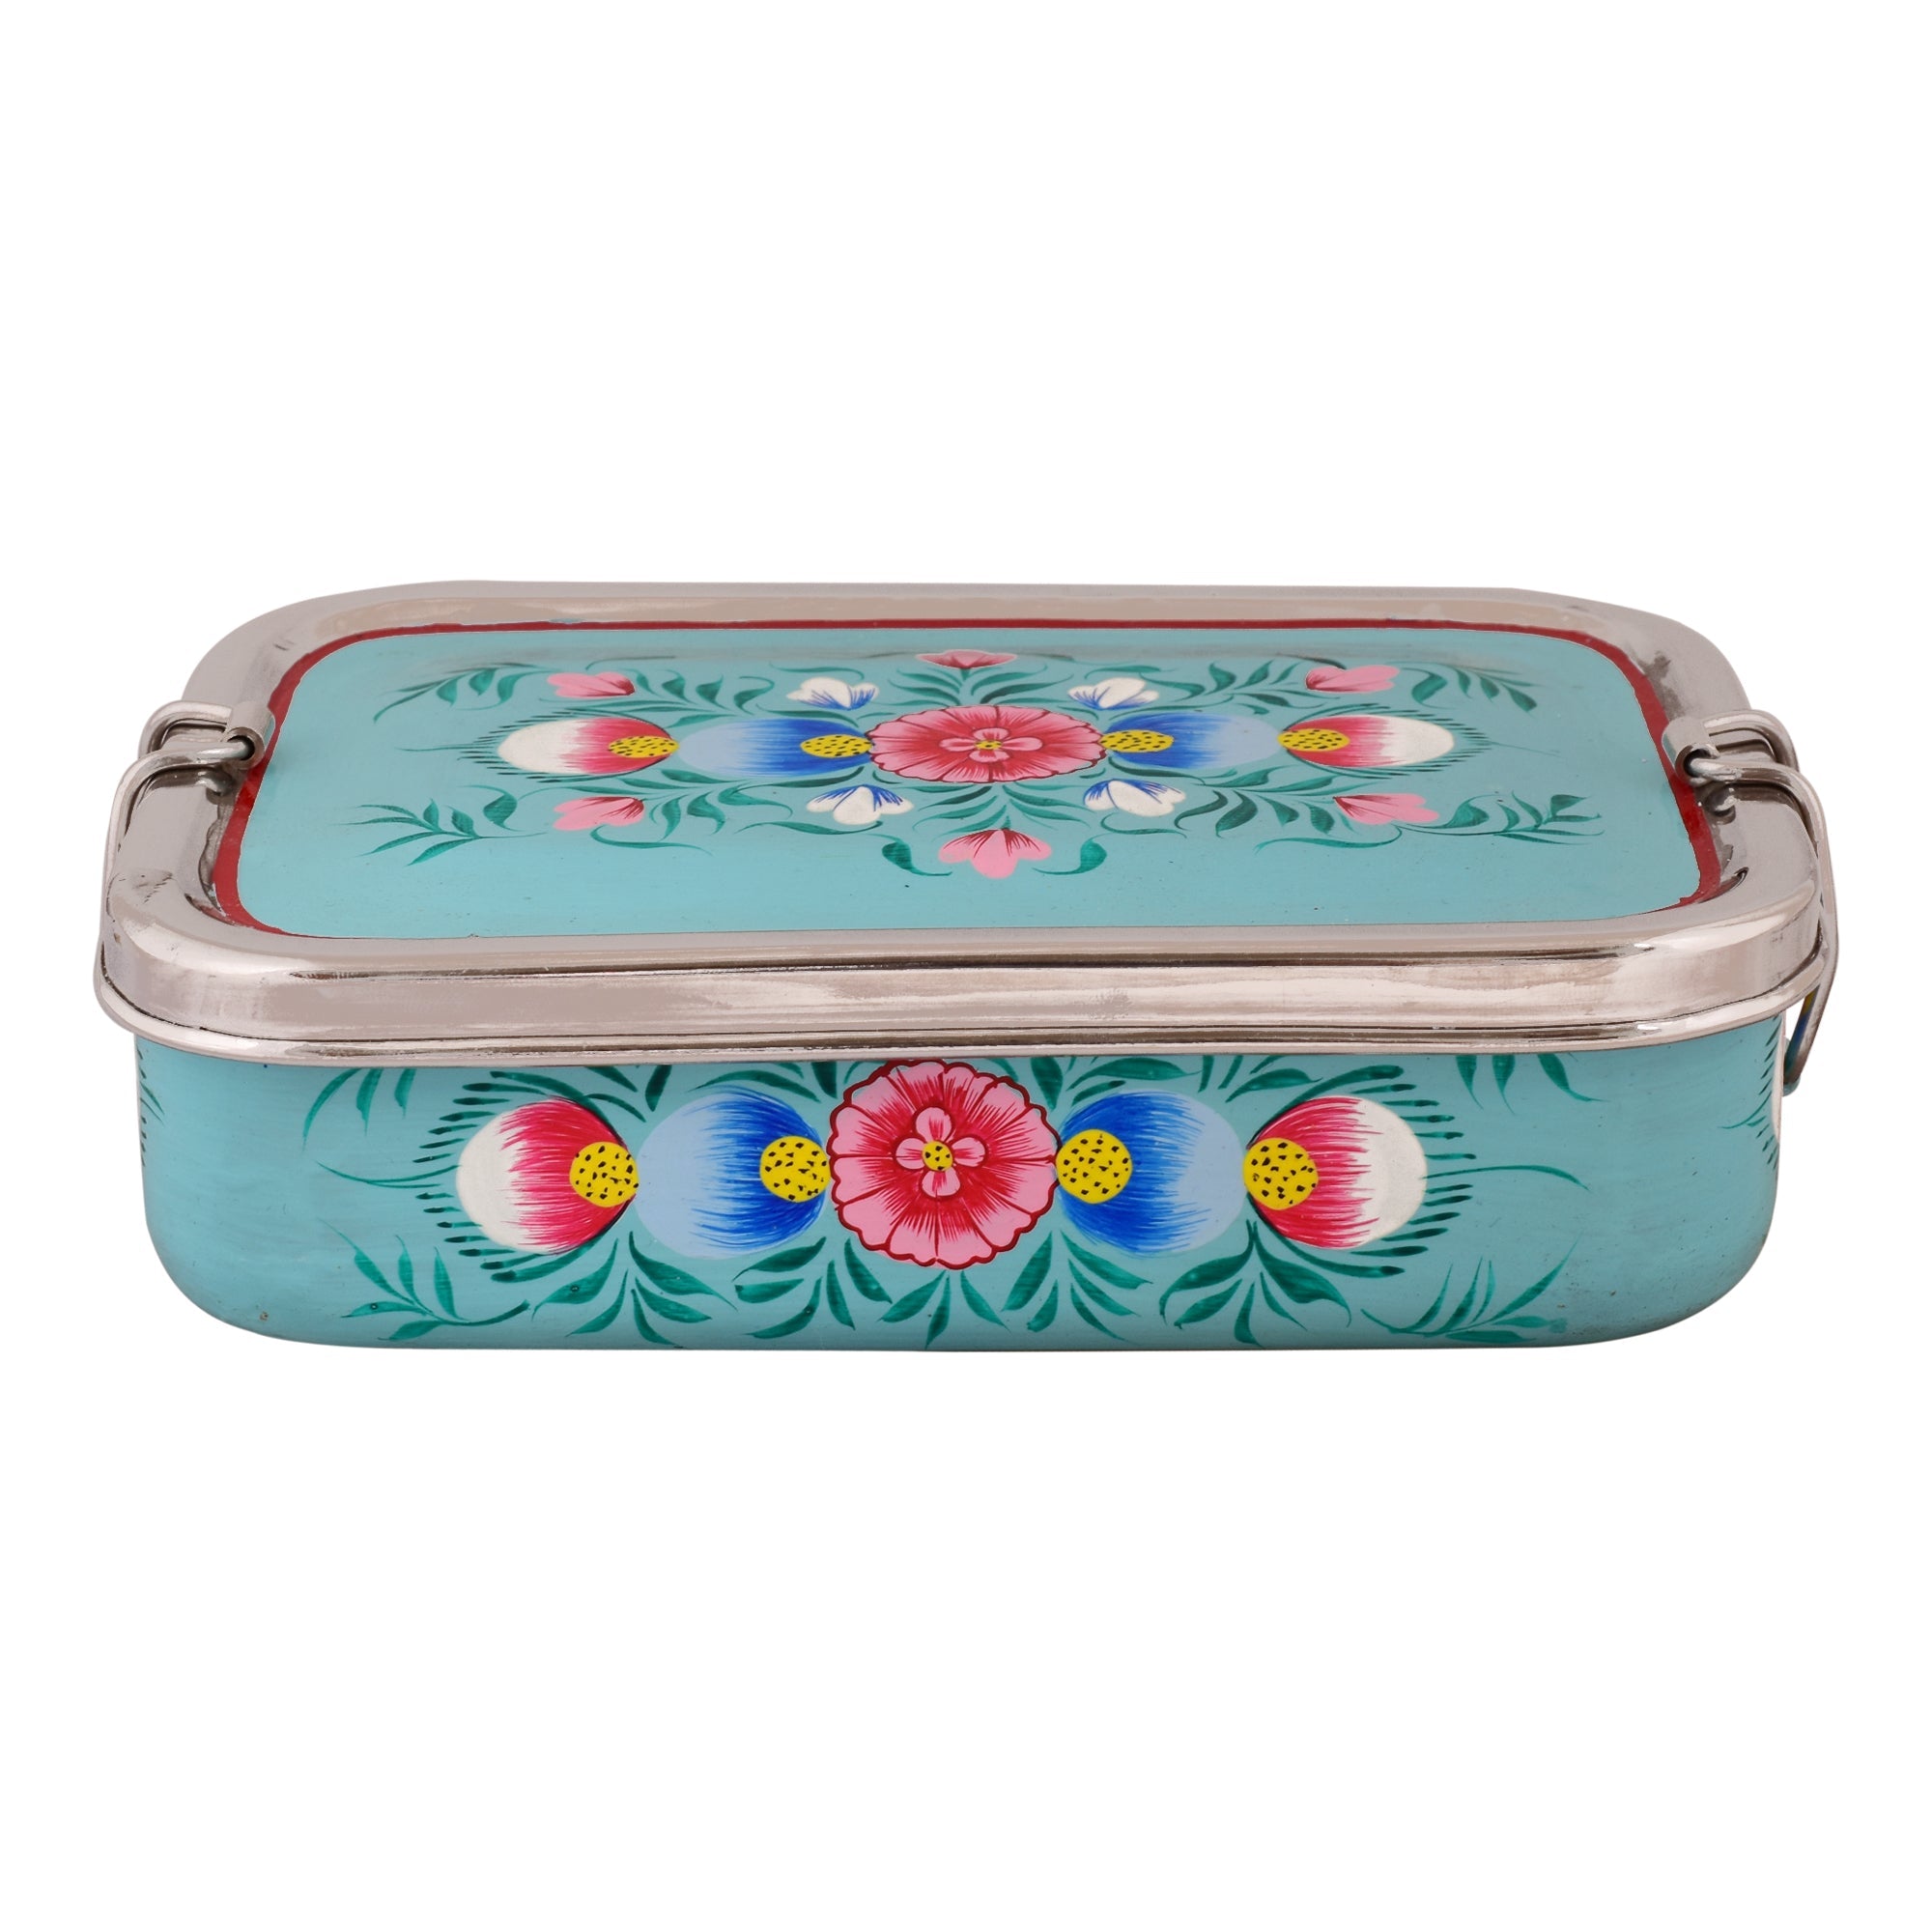 Hand Painted Lunch Box , Bento Box : School Lunch Box